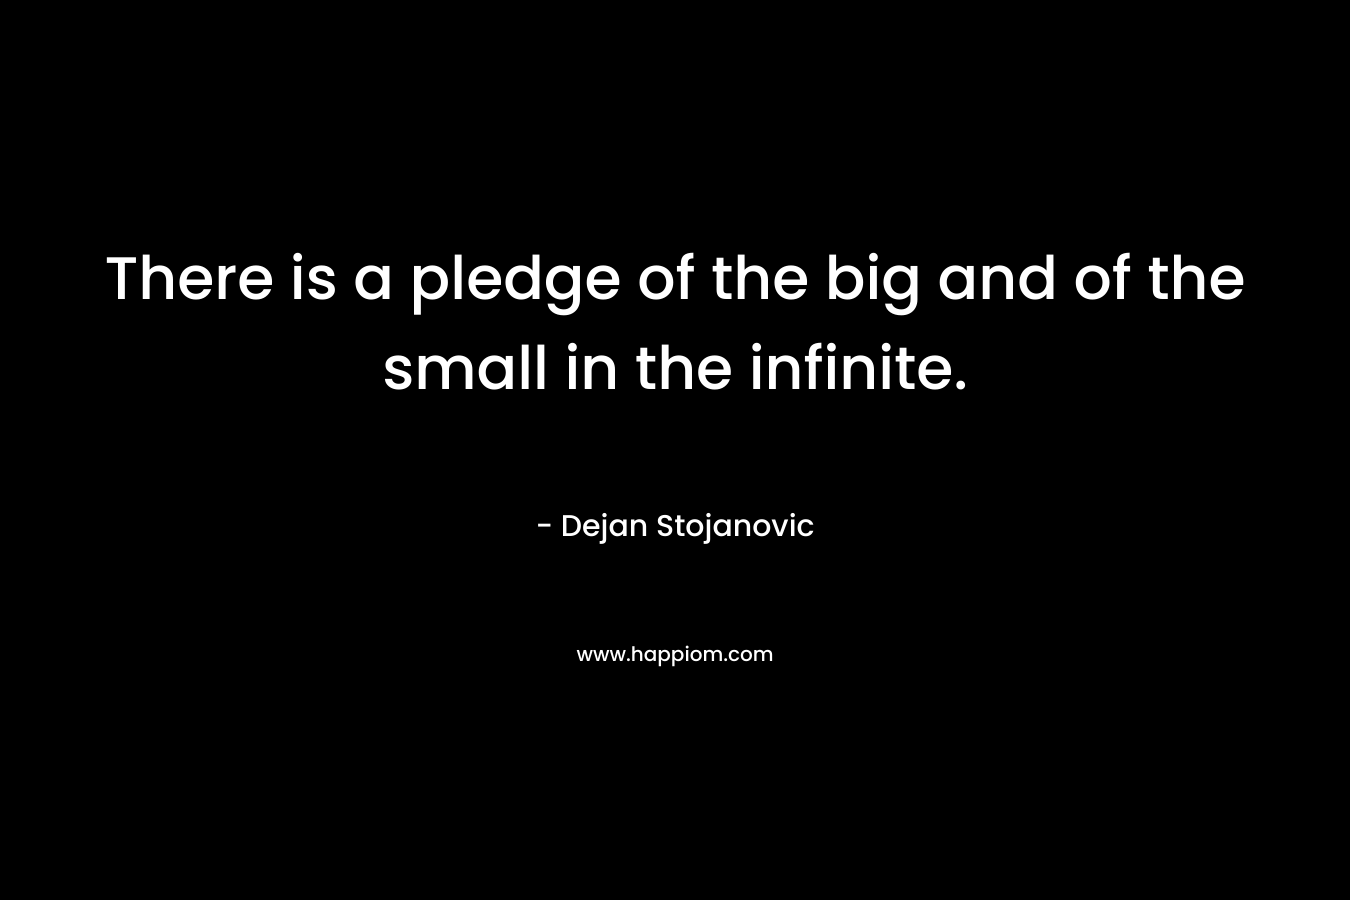 There is a pledge of the big and of the small in the infinite. – Dejan Stojanovic